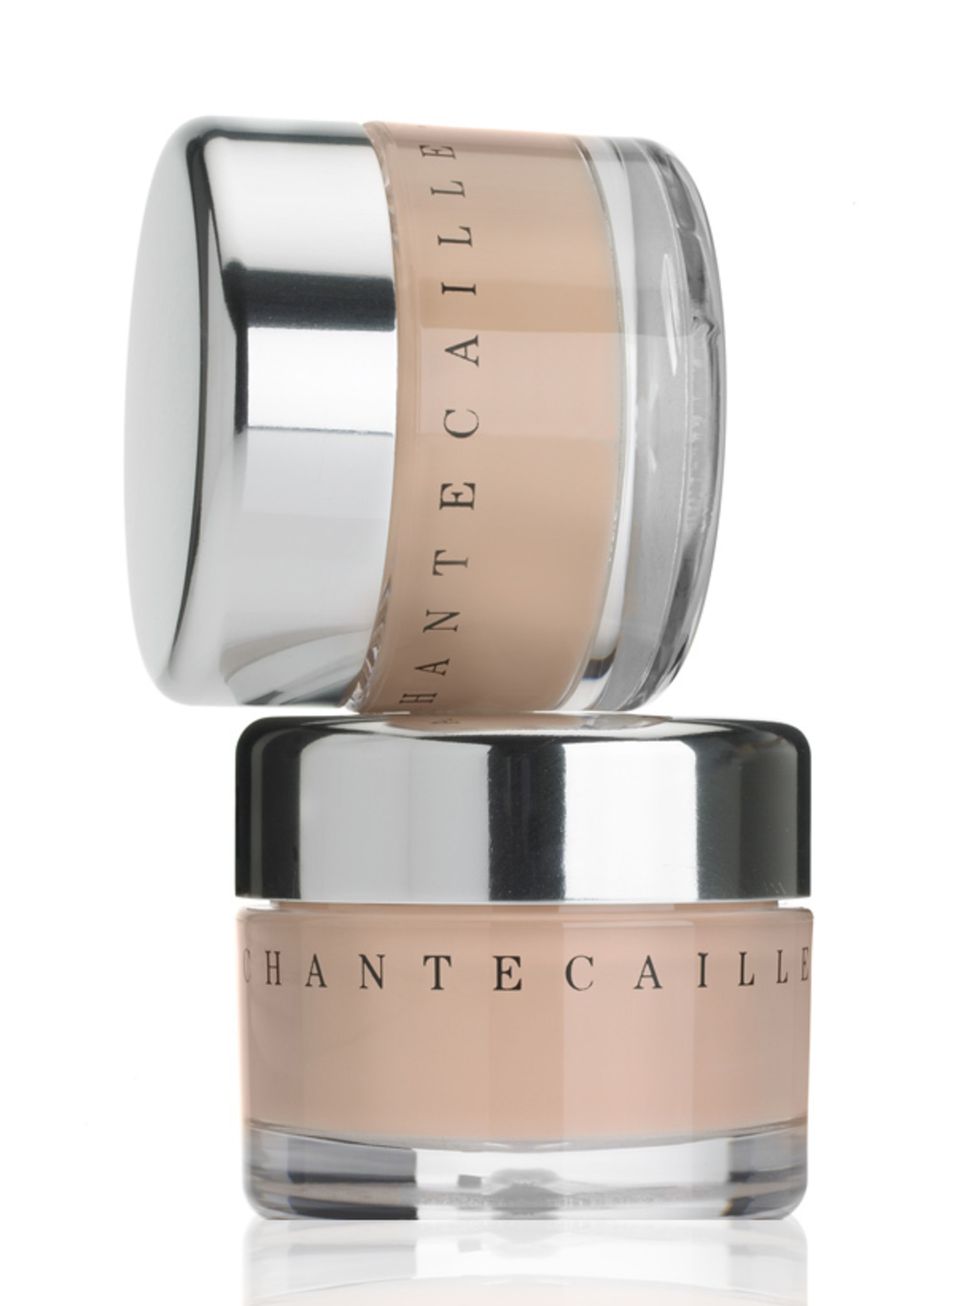 <p>Foundation, from £35 by Chantecaille at <a href="http://www.spacenk.co.uk/category/shop+by+brand/chantecaille.do">Space NK</a></p><p>Havent heard of Chantecaille yet? Shame on you! For the perfect coverage, the perfect shade and the perfect texture, g